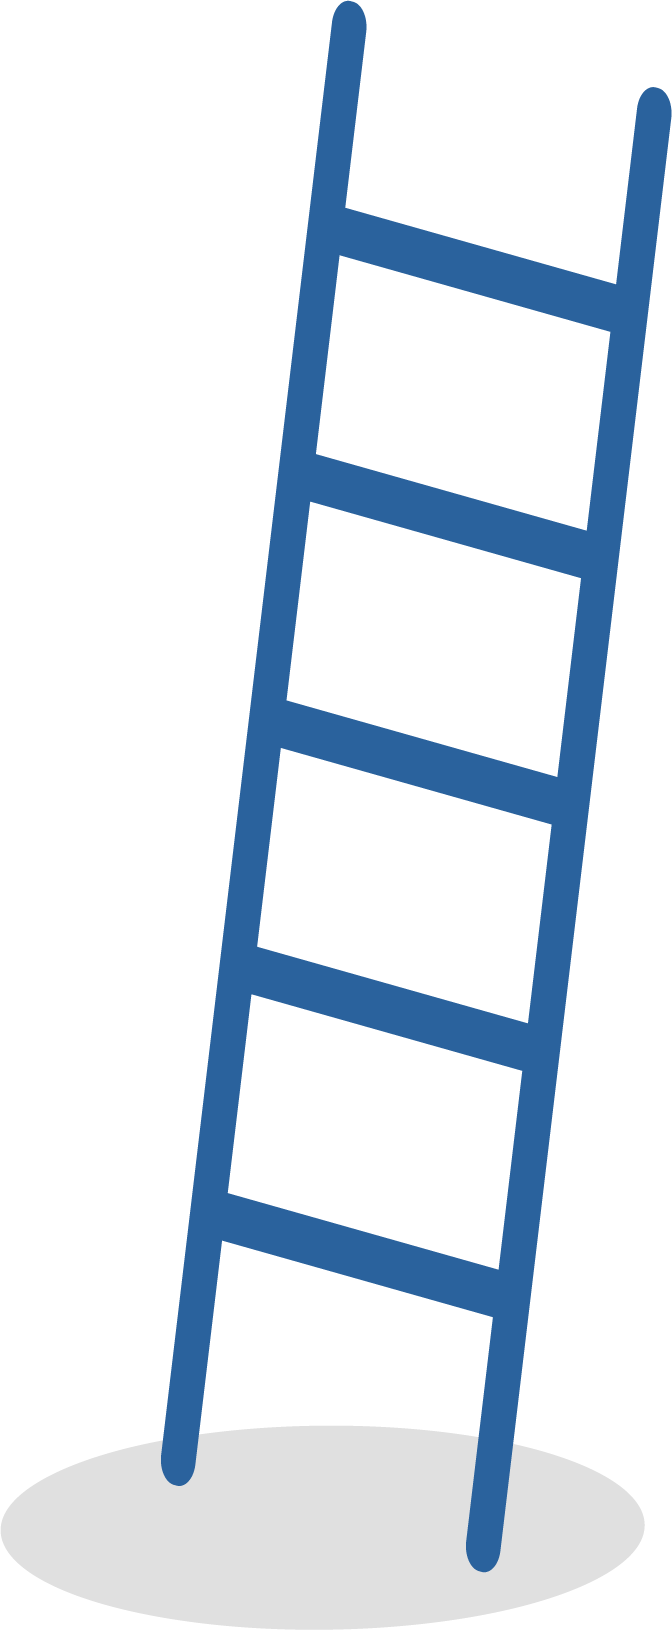 Vector illustration of a blue ladder leaning to the right.